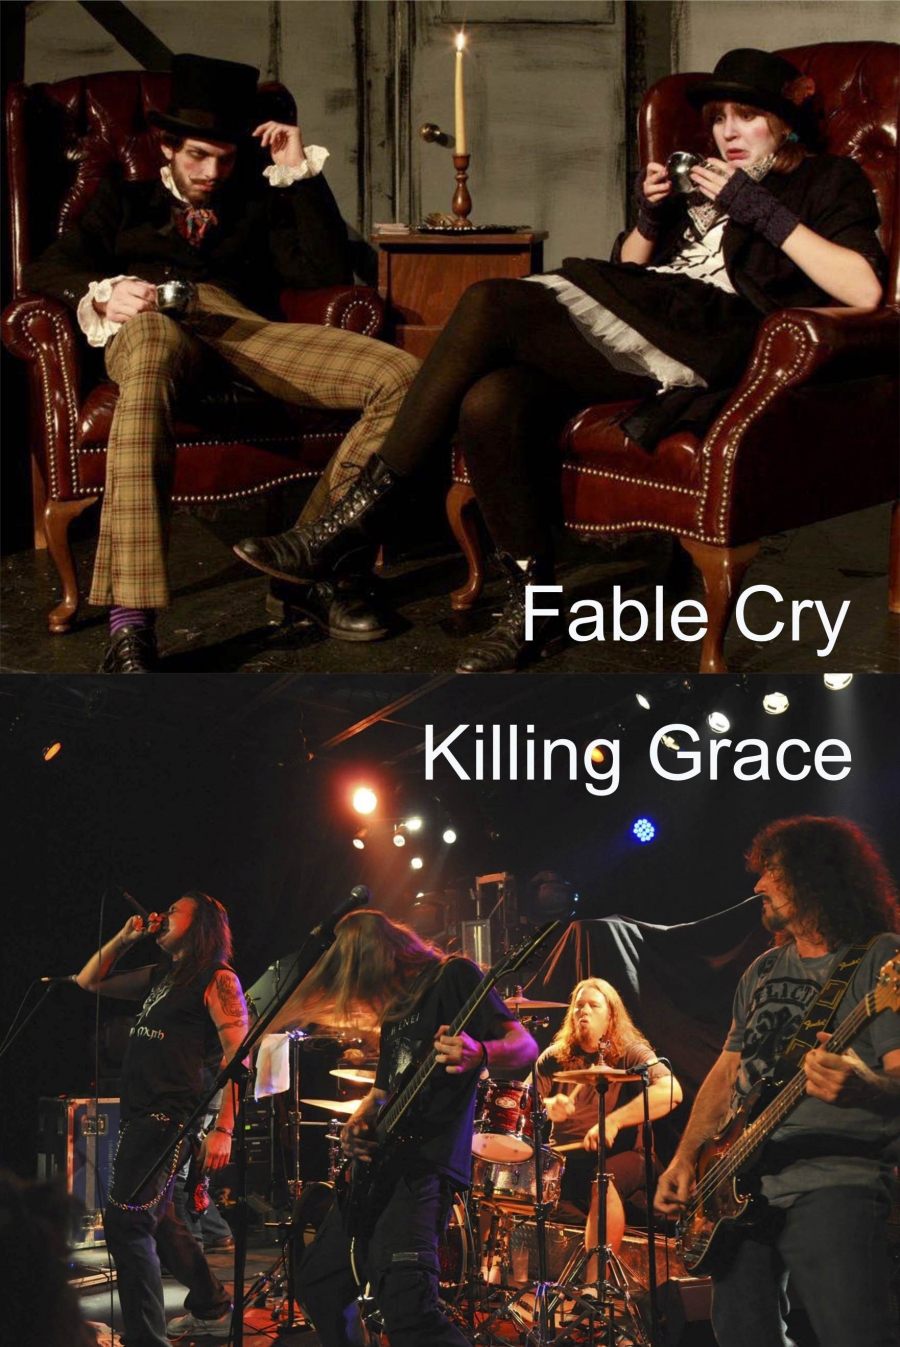 Best of Nashville Alt Rock/Metal Acts: Fable Cry and Killing Grace